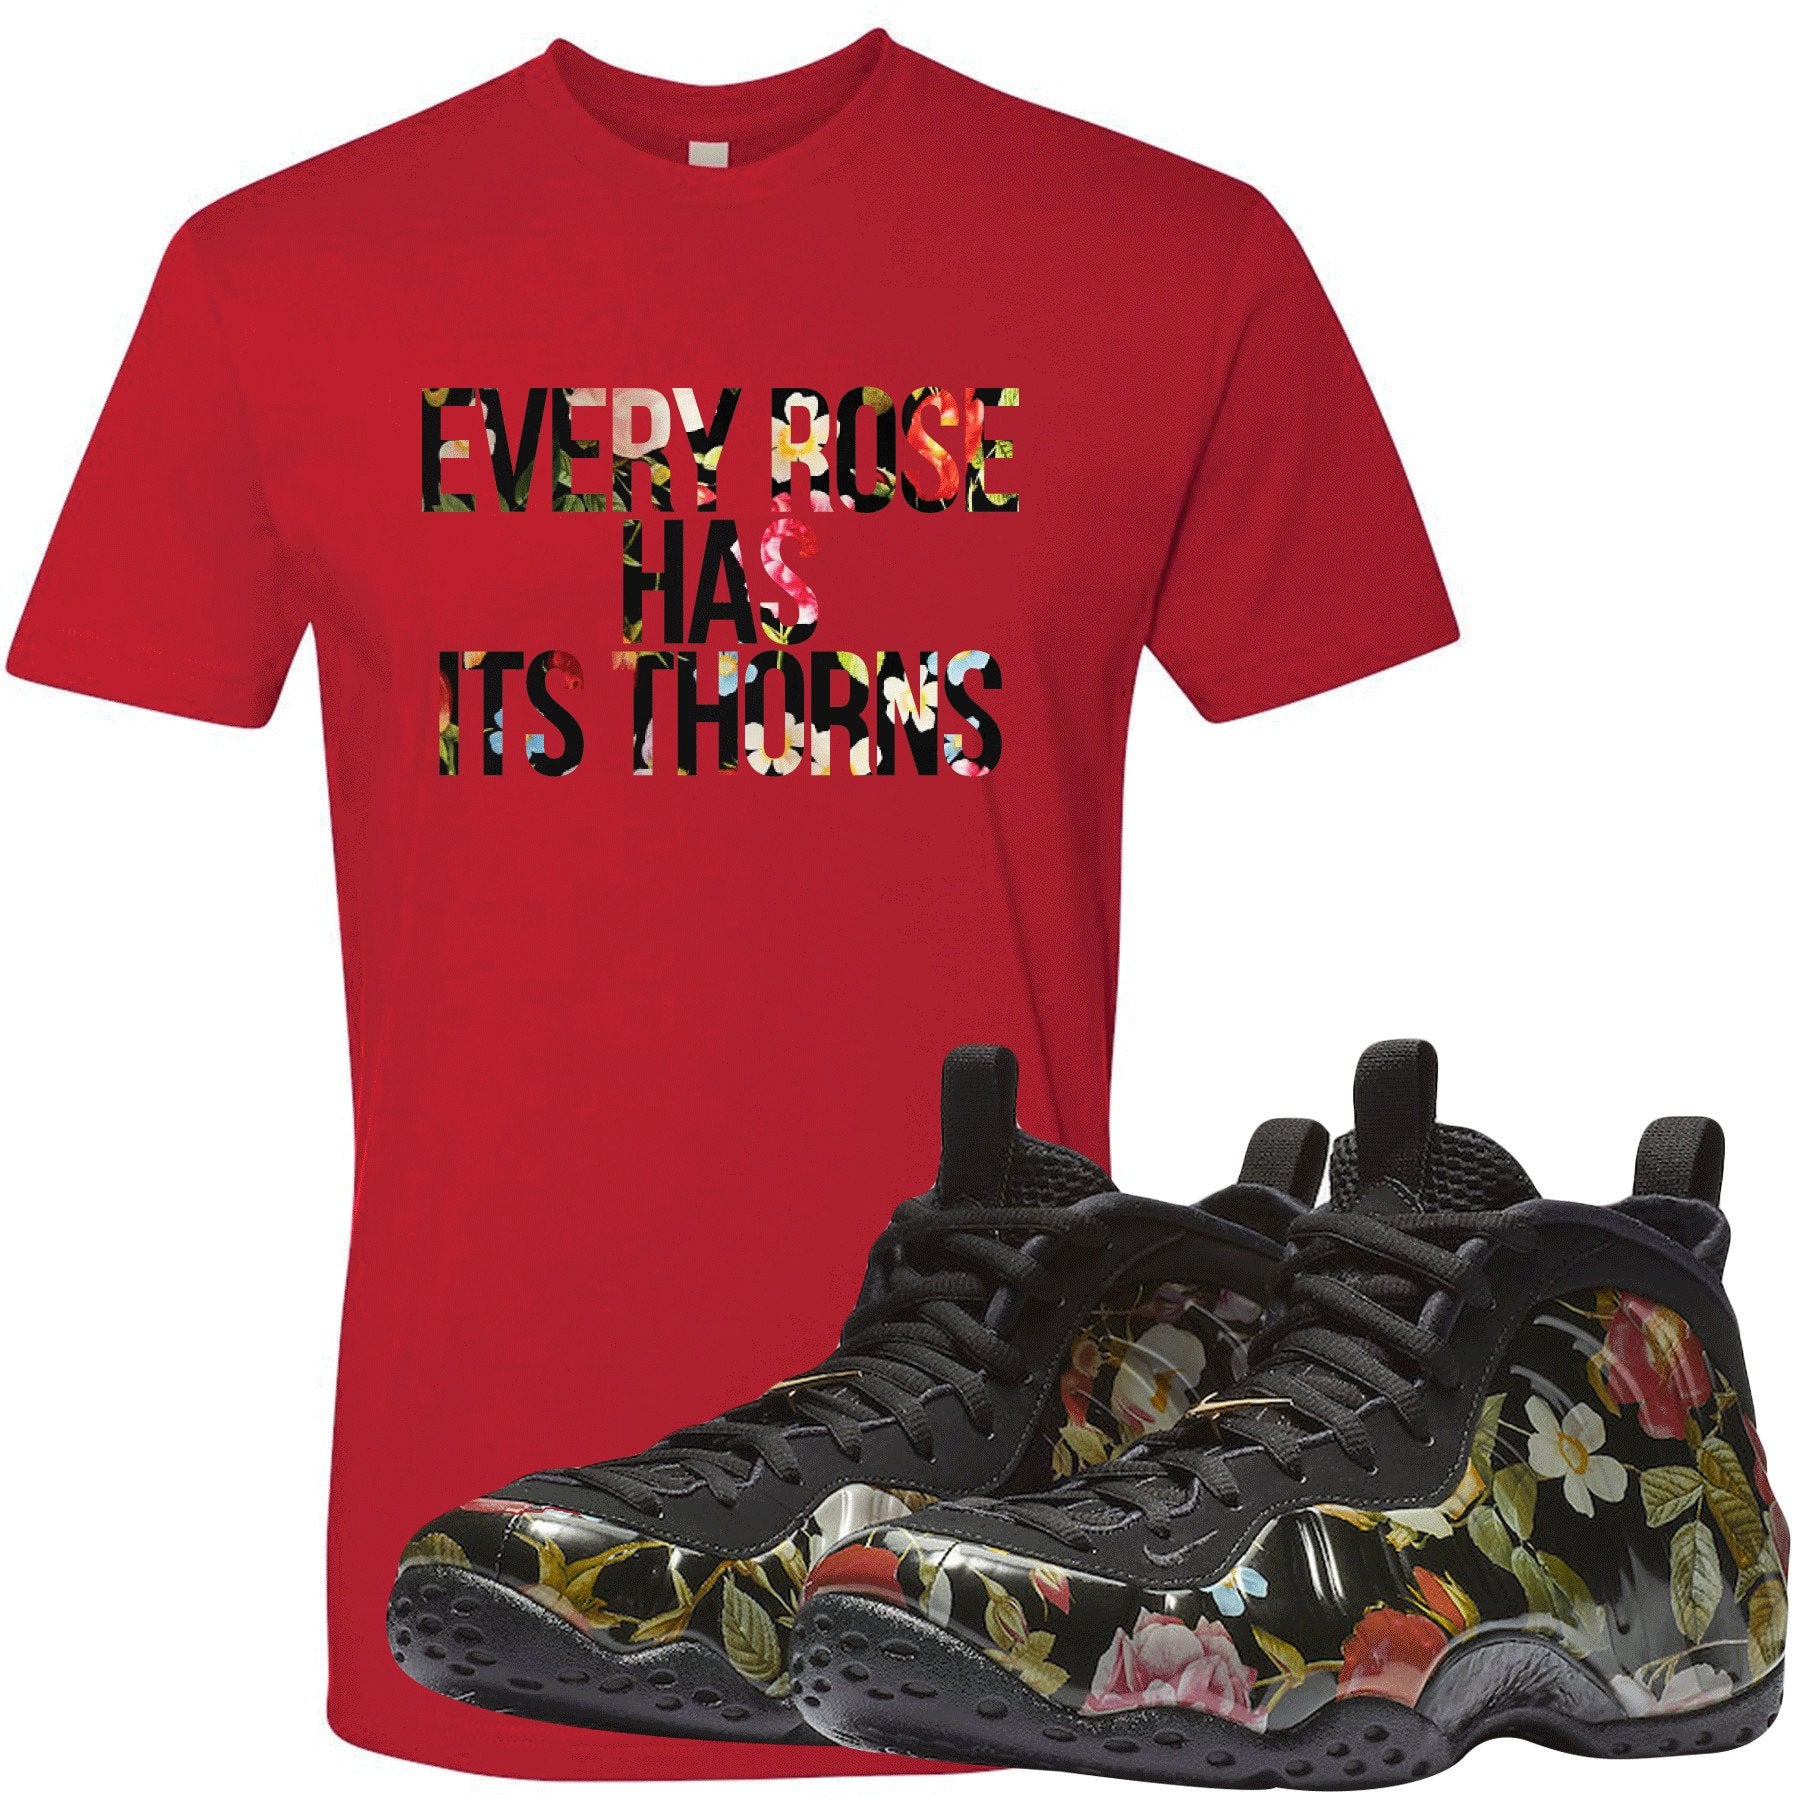 Wear this sneaker matching t-shirt to match your Air Foamposite One Floral sneakers. Match your floral foams today!